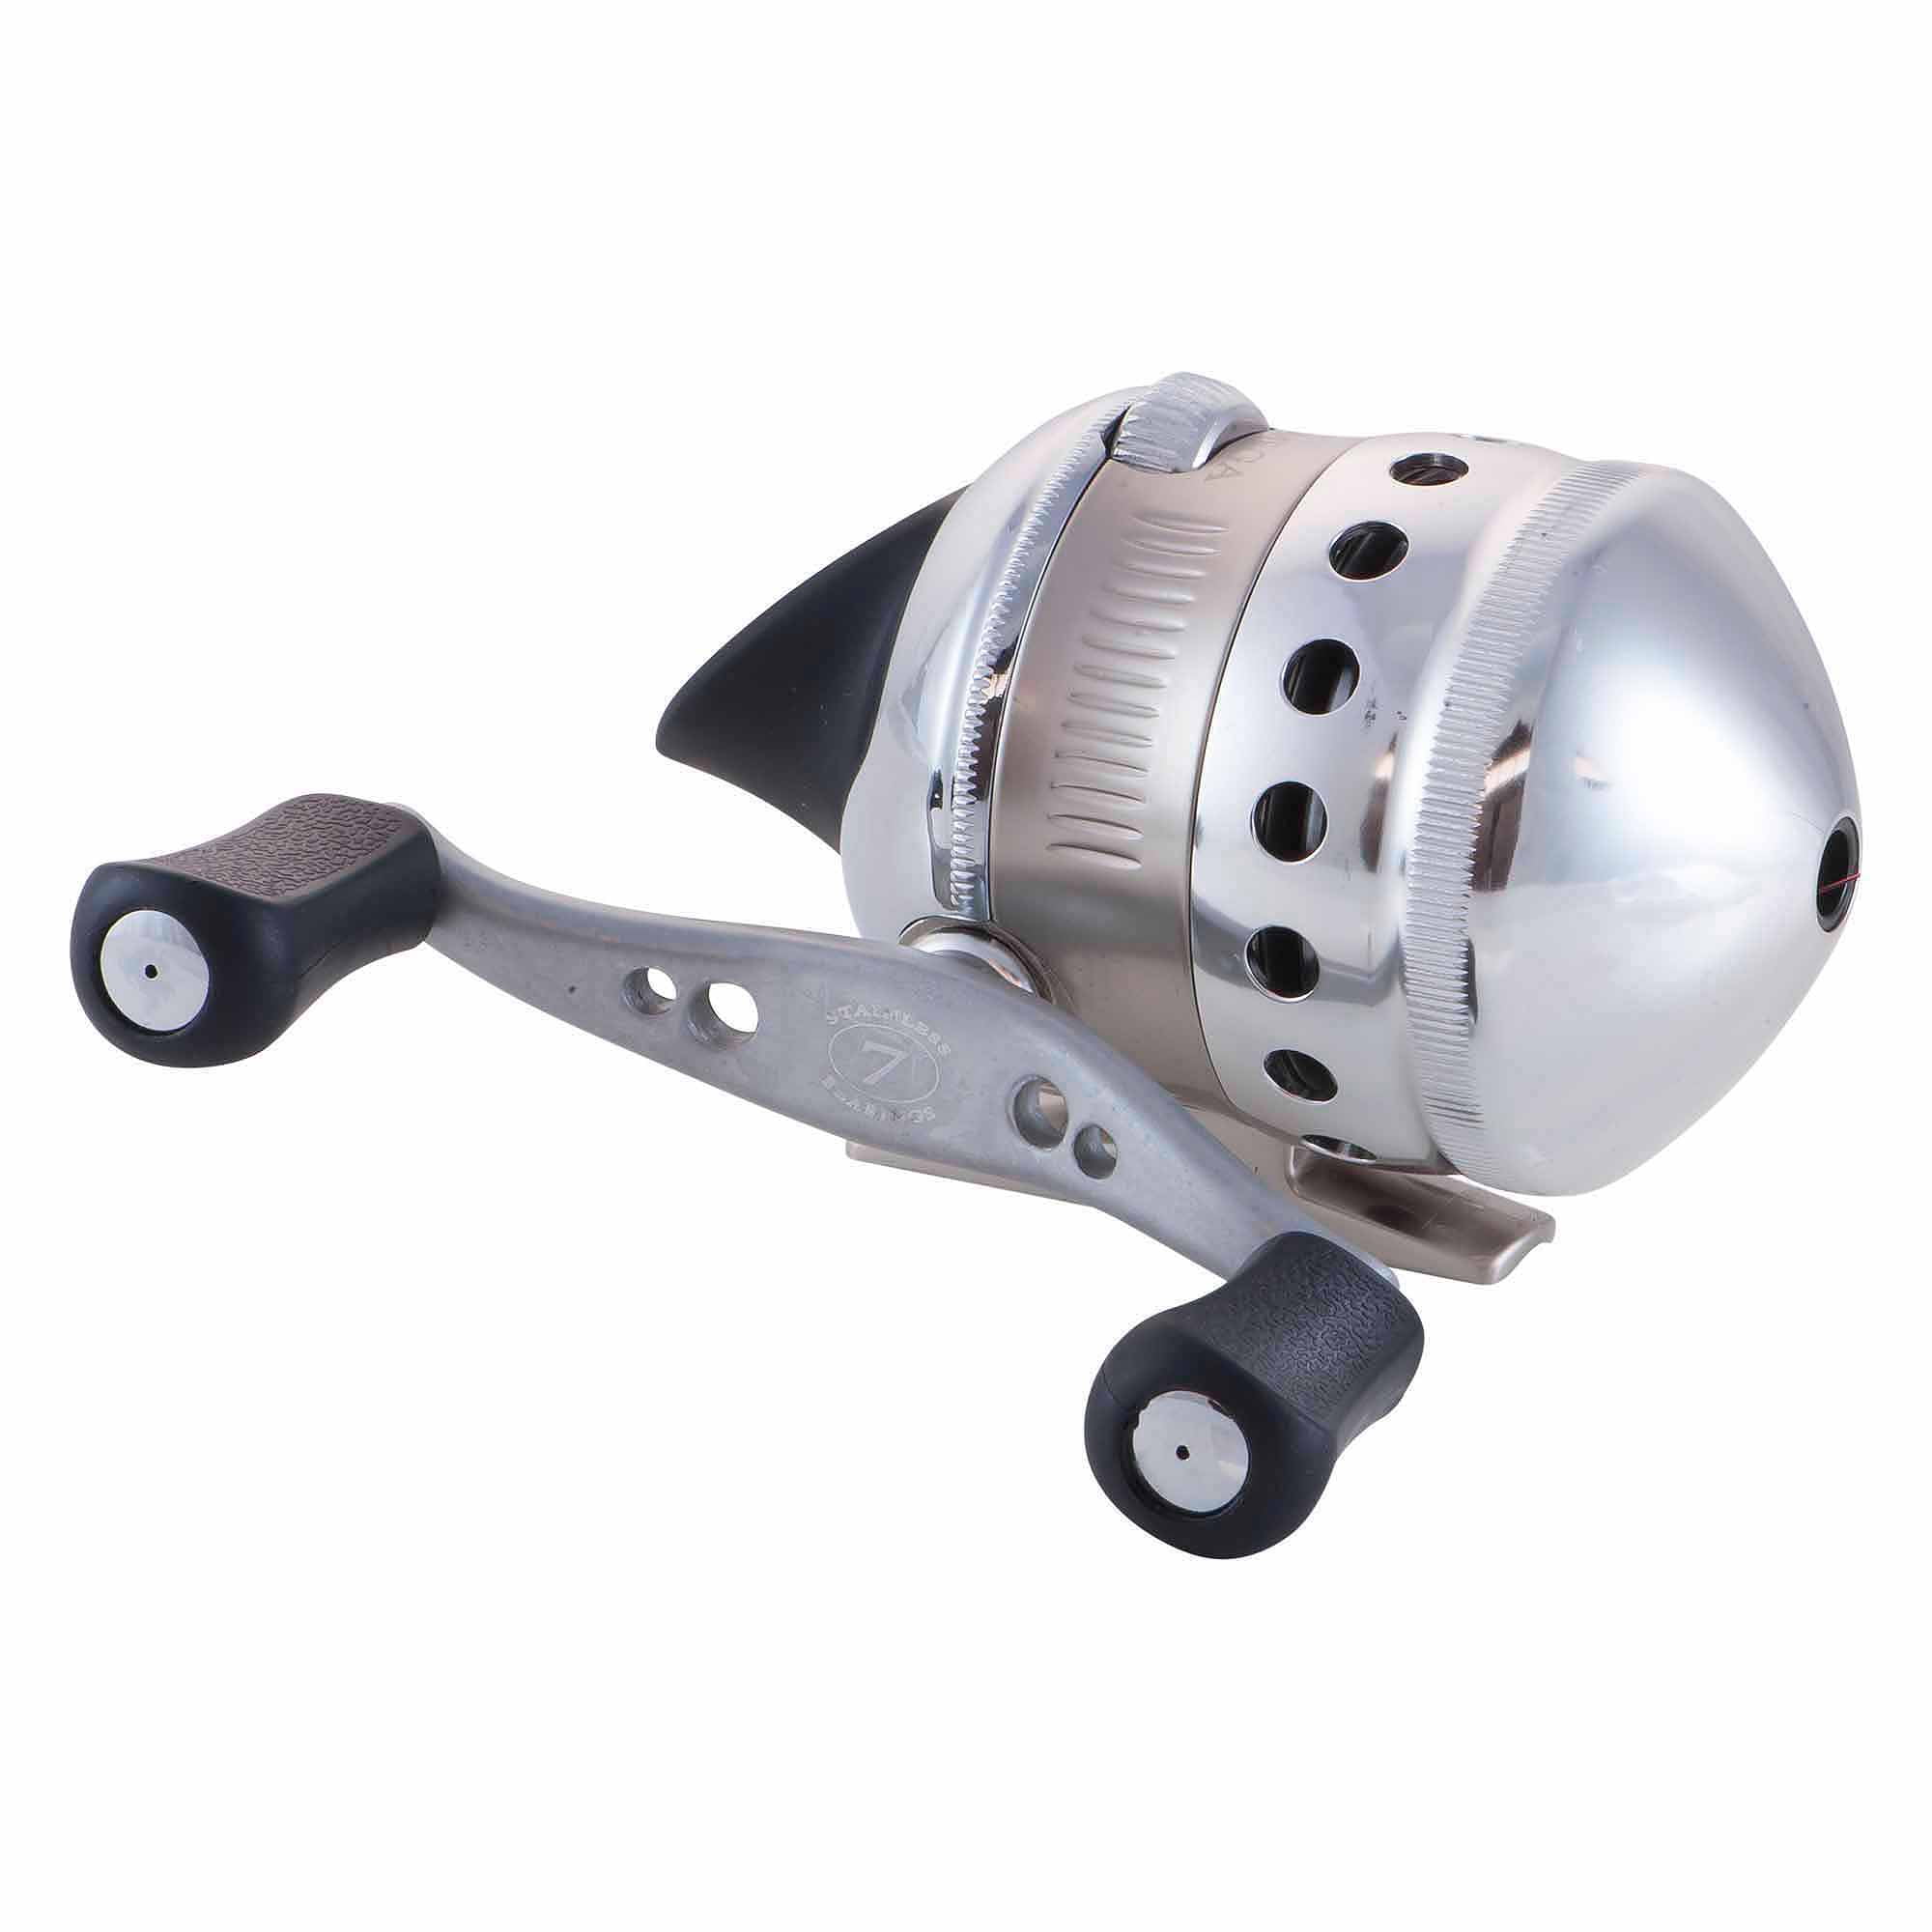 Zebco Omega Spincast Fishing Reel, Size 30 Reel, Changeable Right or  Left-Hand Retrieve, Pre-Spooled with 10-Pound Zebco Fishing Line, Aluminum  and